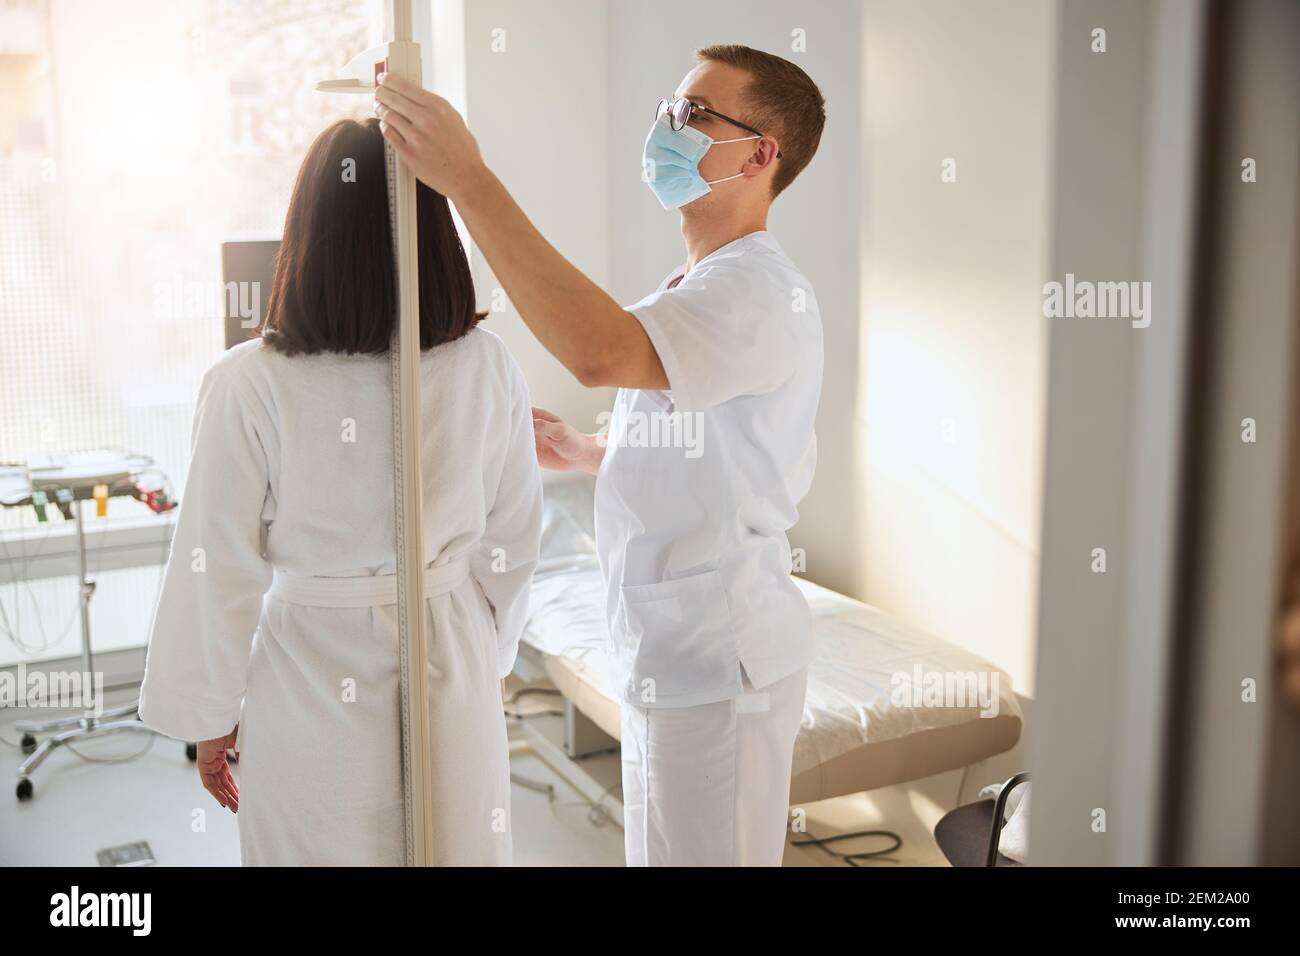 Physician using a stadiometer in a routine medical examination Stock Photo